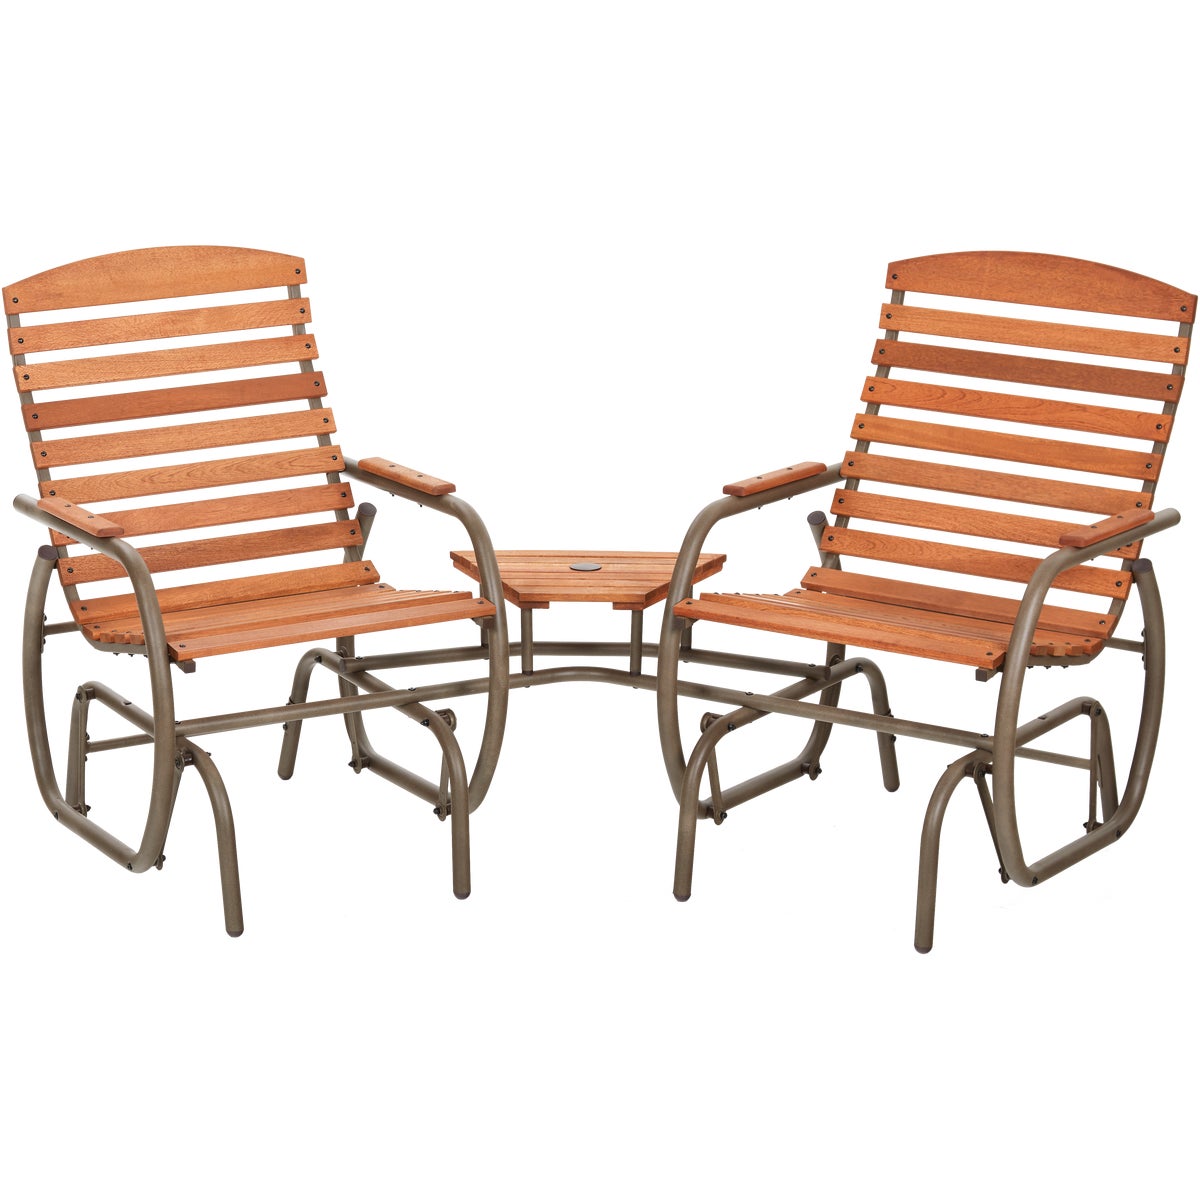 Item 817138, The tete-a-tete has 2 independent glider chairs connected by a common side 